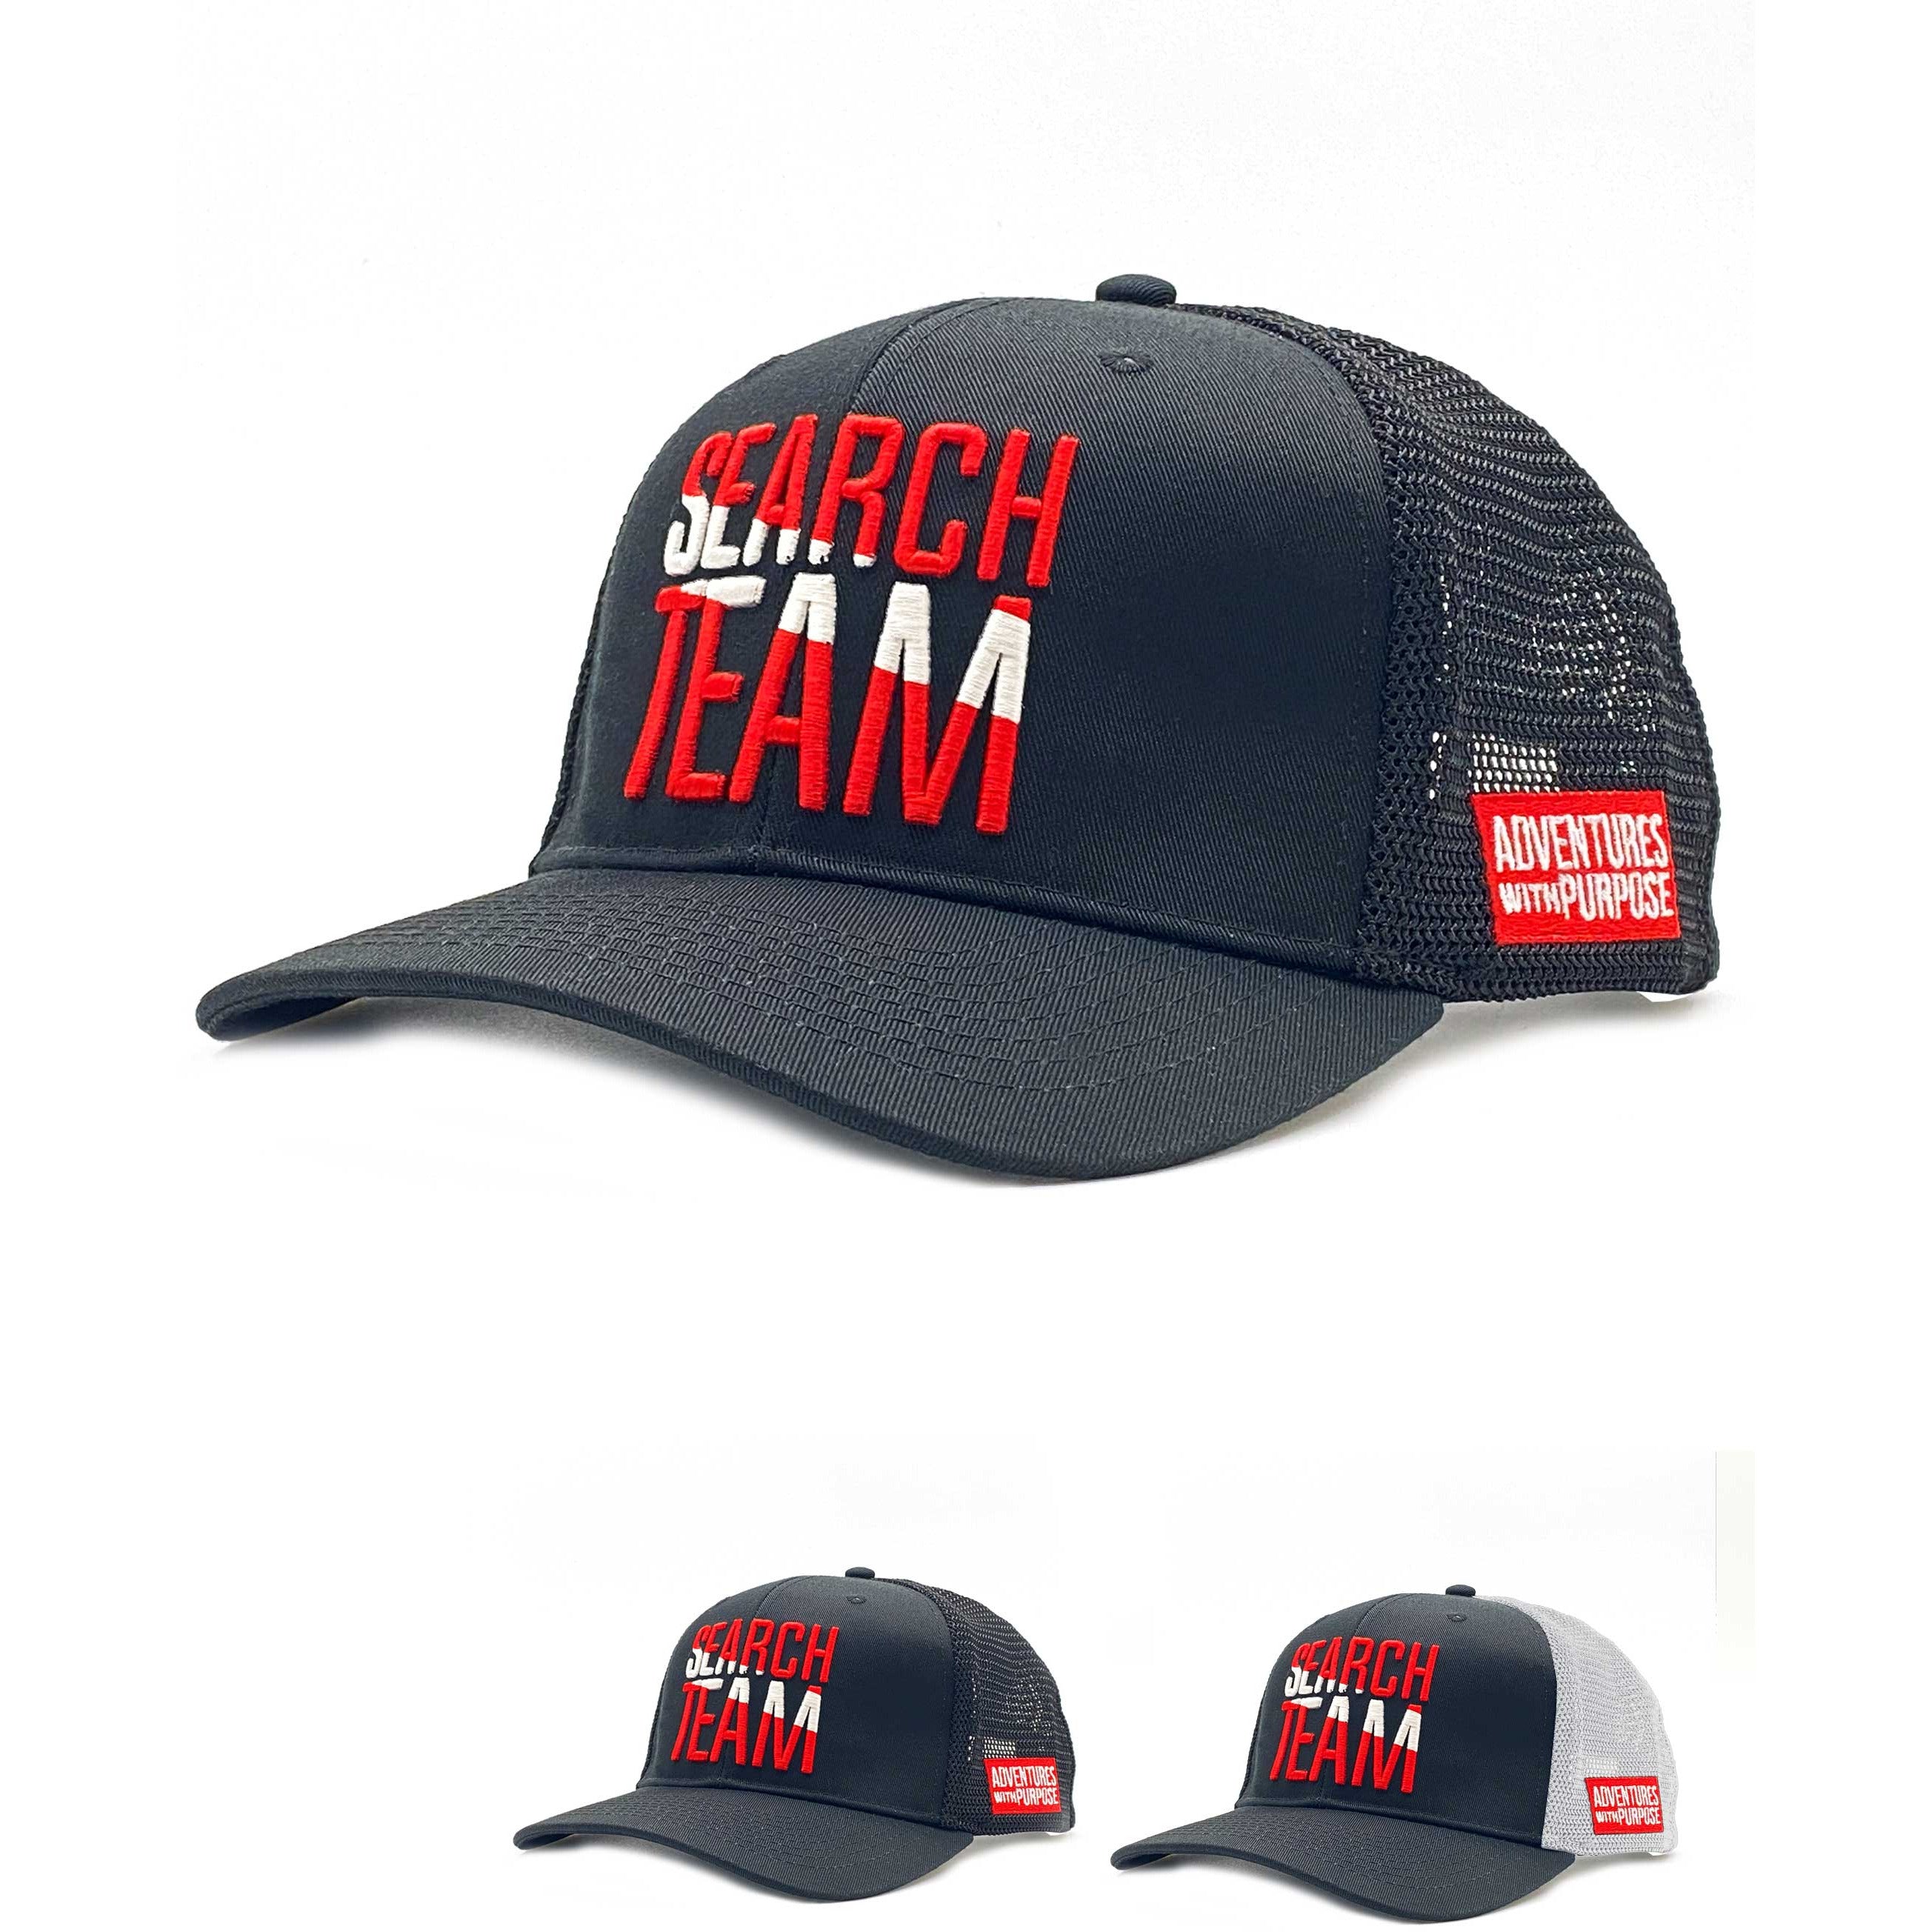 Adventures Purpose - SEARCH TEAM 3D EMBROIDERED HATS